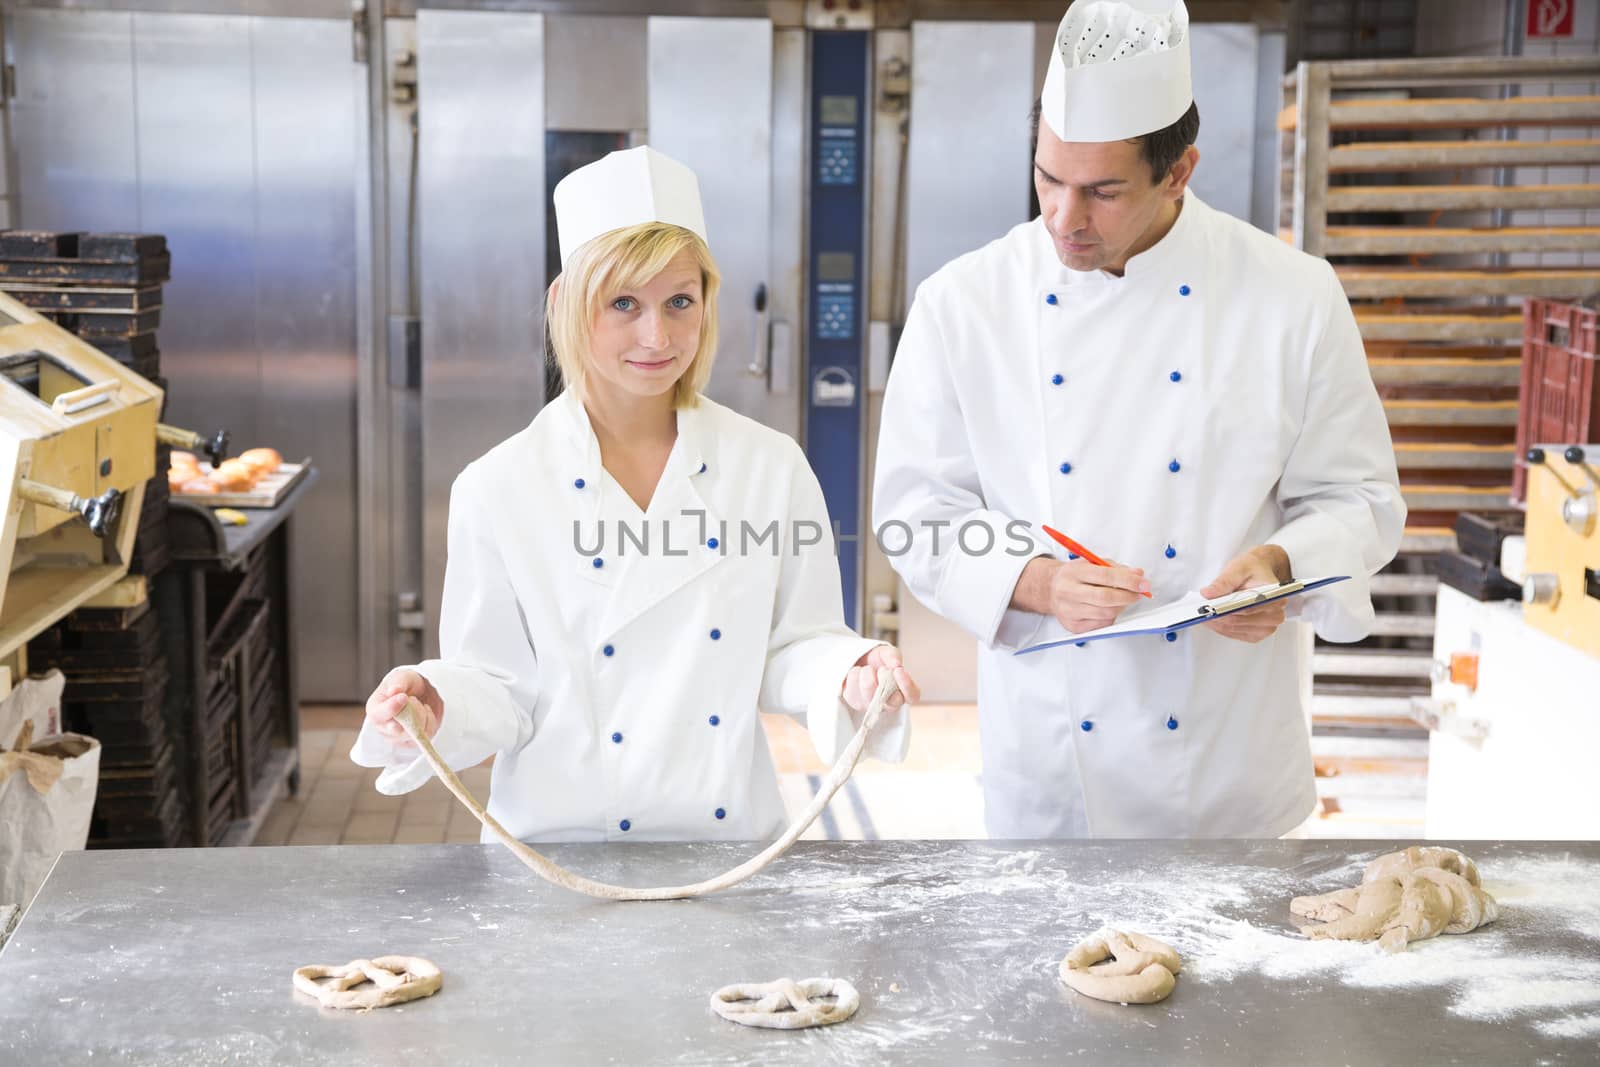 Instructor in bakery teaching apprentice how to form a pretzel out of dough